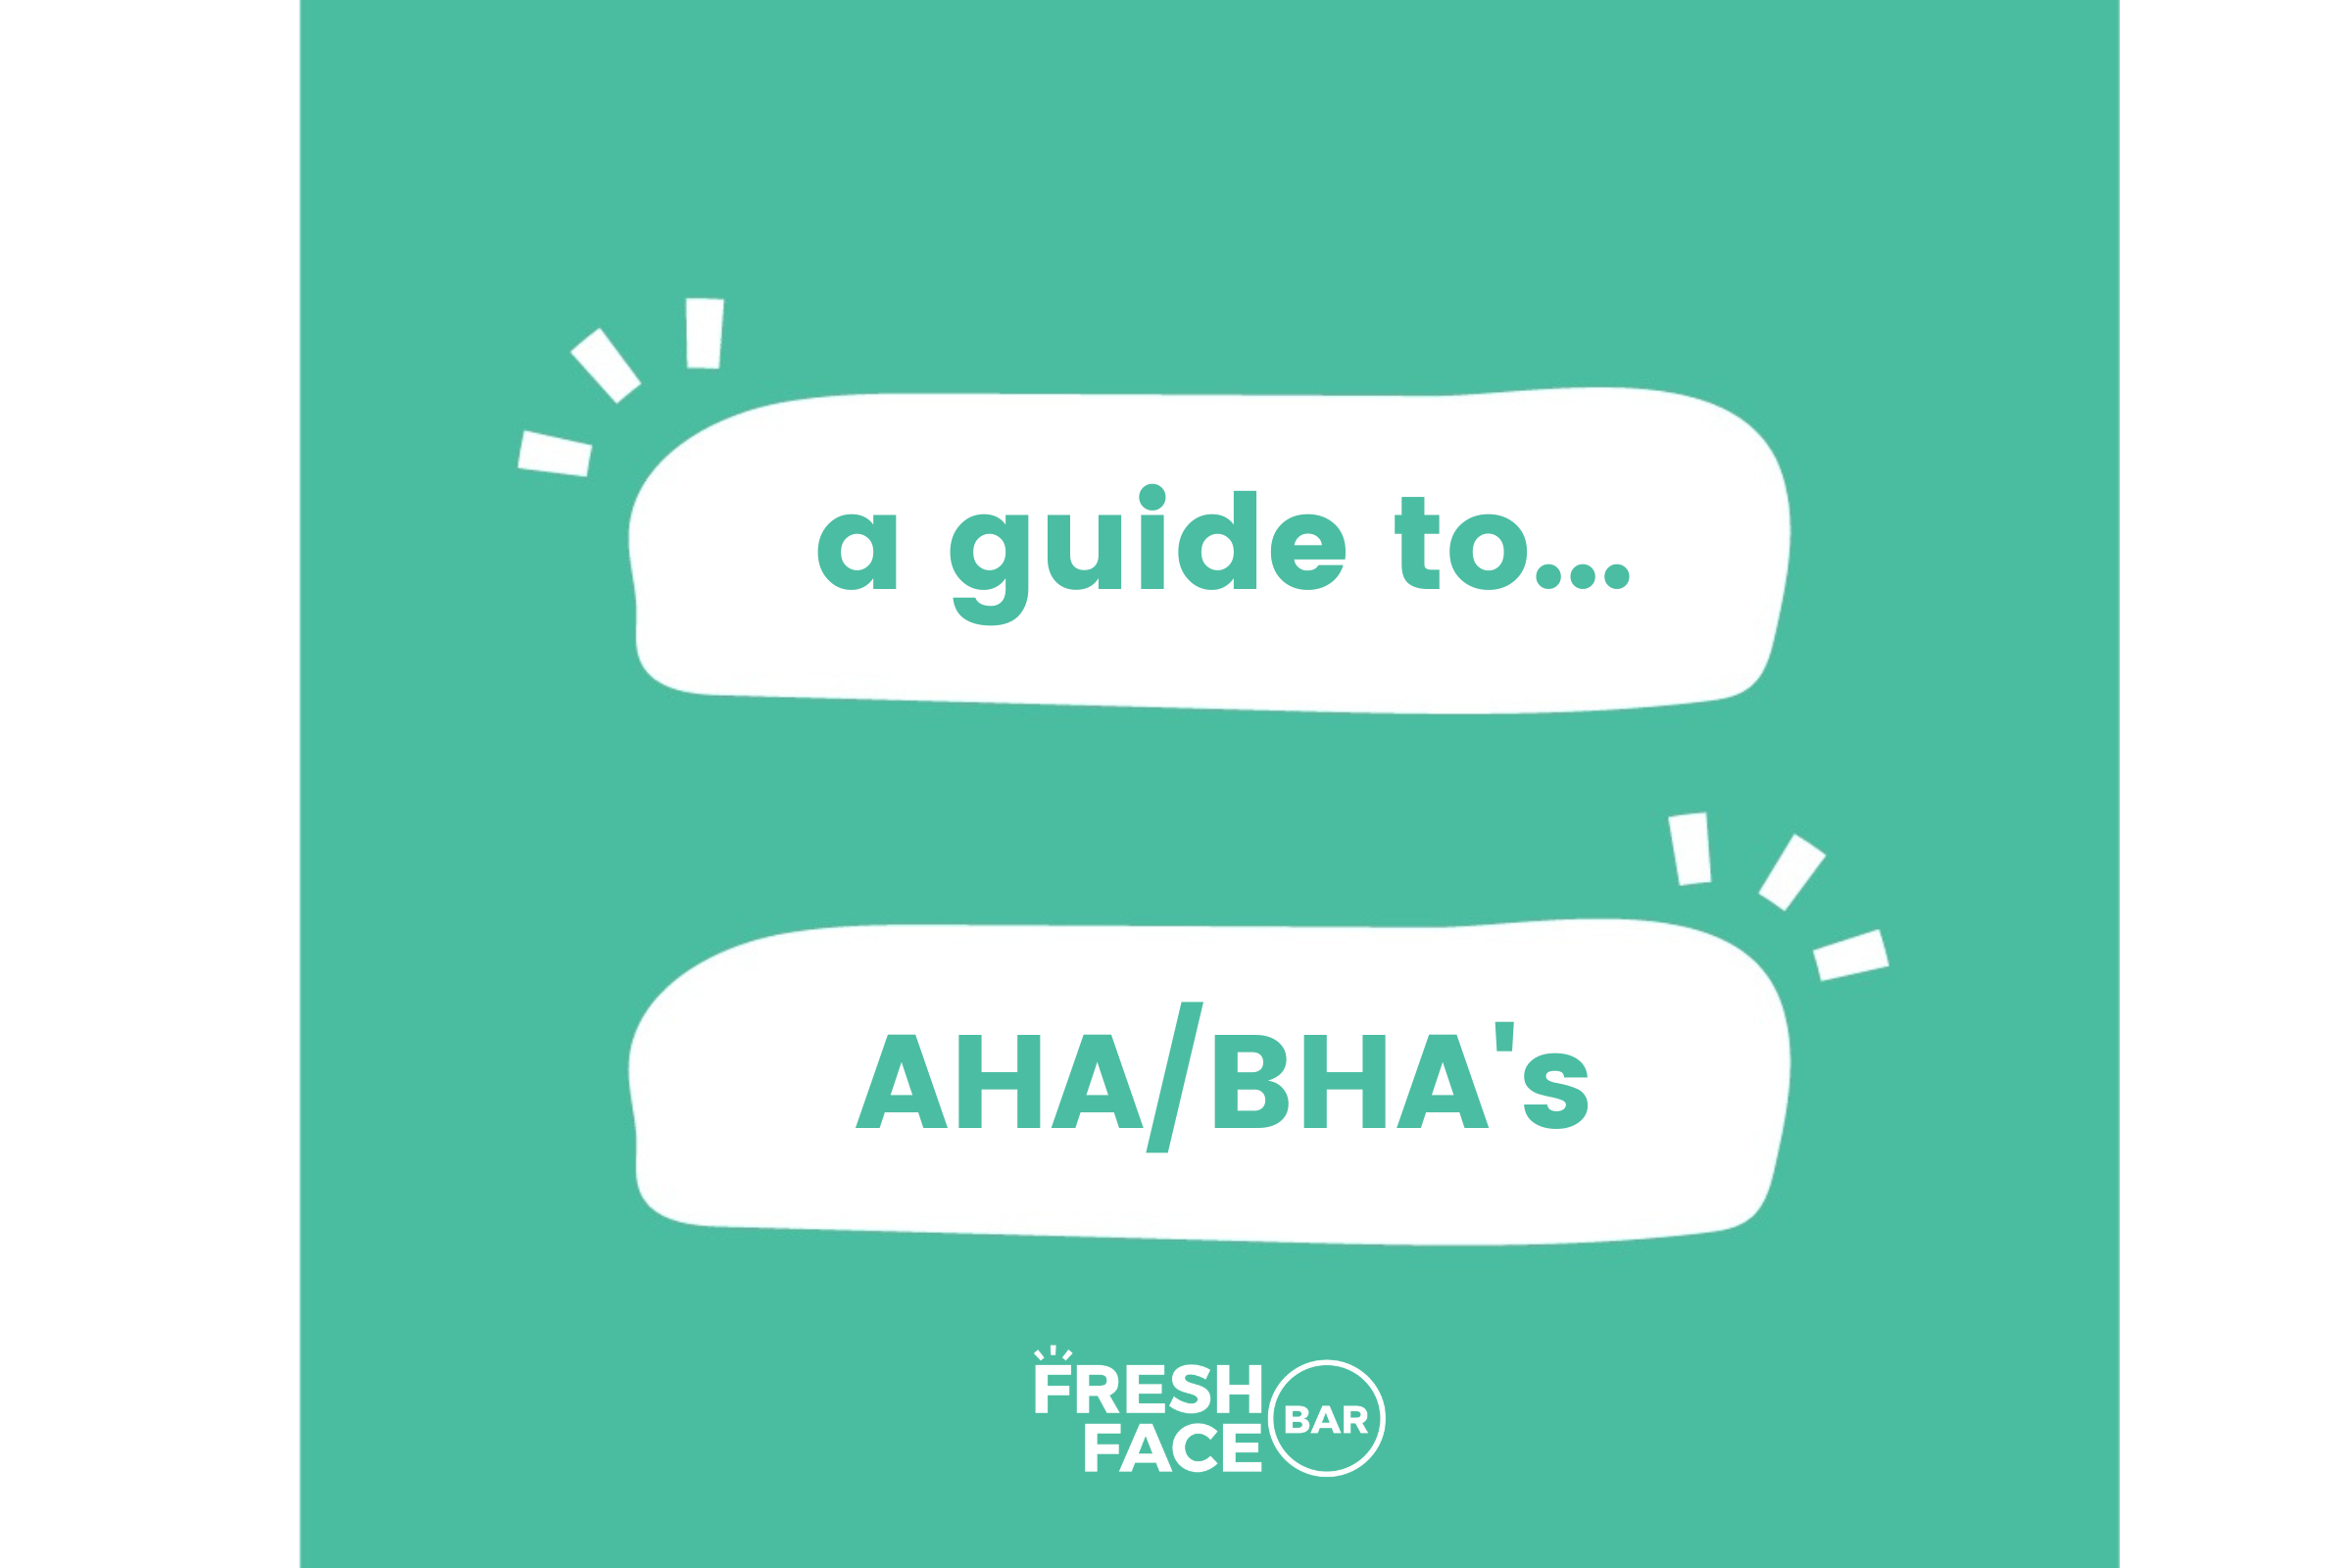 A guide to AHA's & BHA's